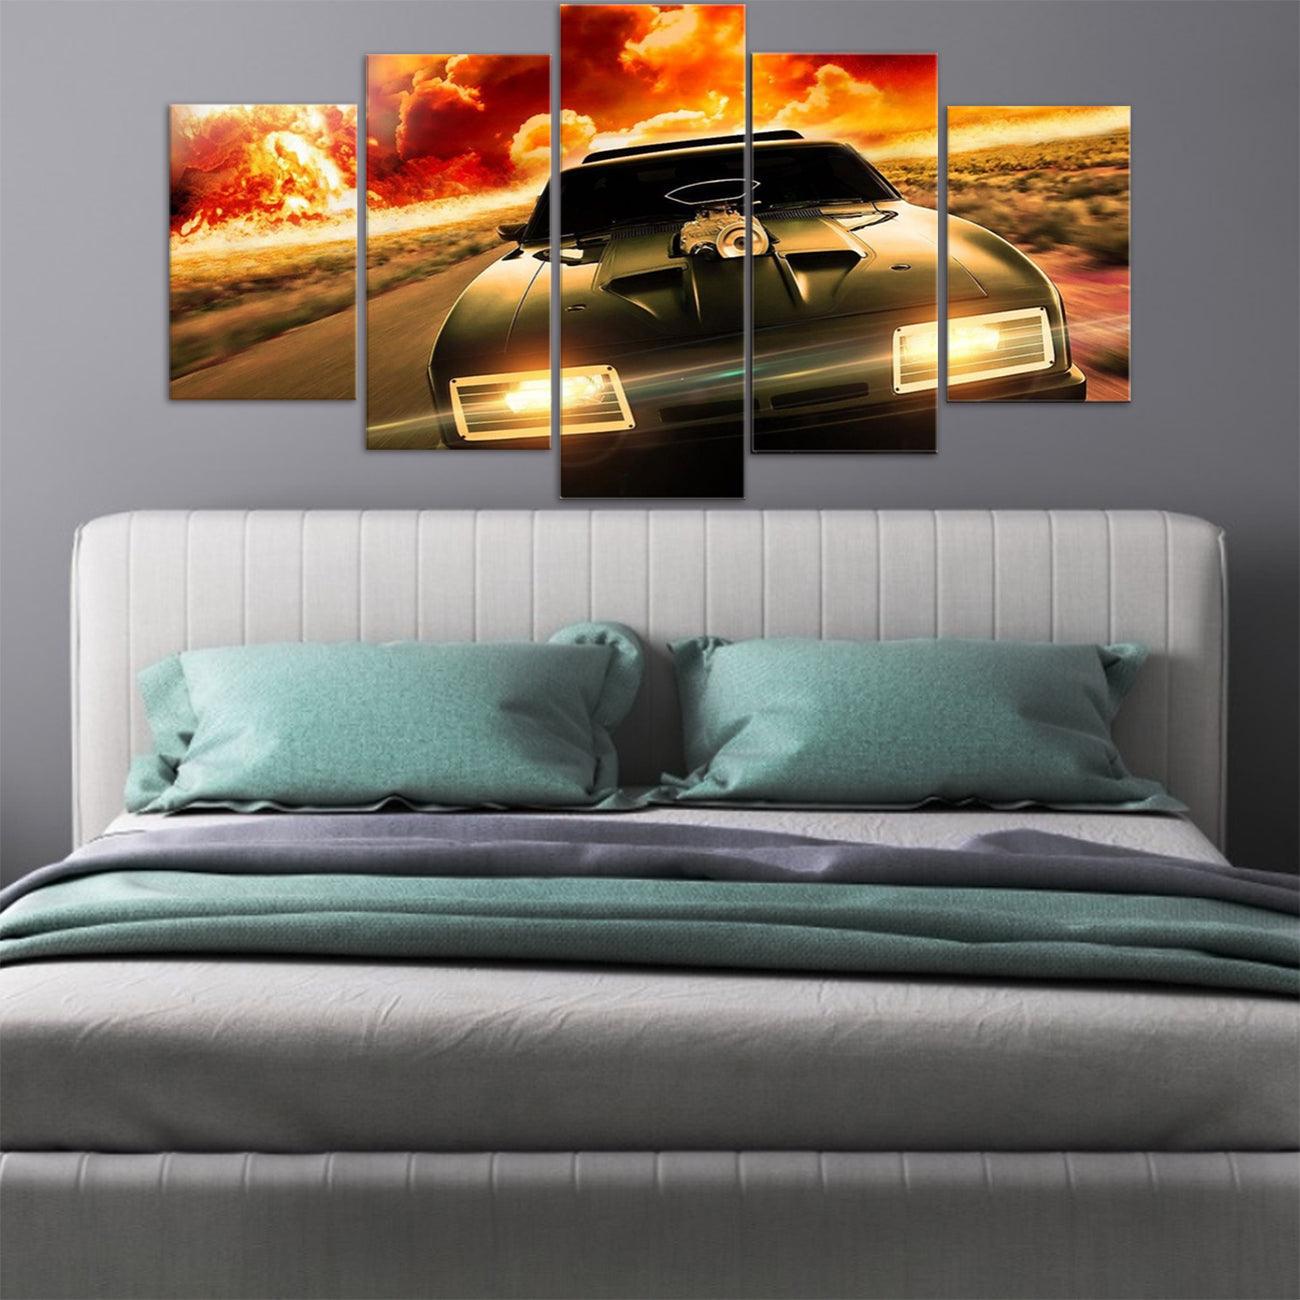 Ford Falcon Pursuit Special 5 Panel Canvas Print Wall Art - GotItHere.com